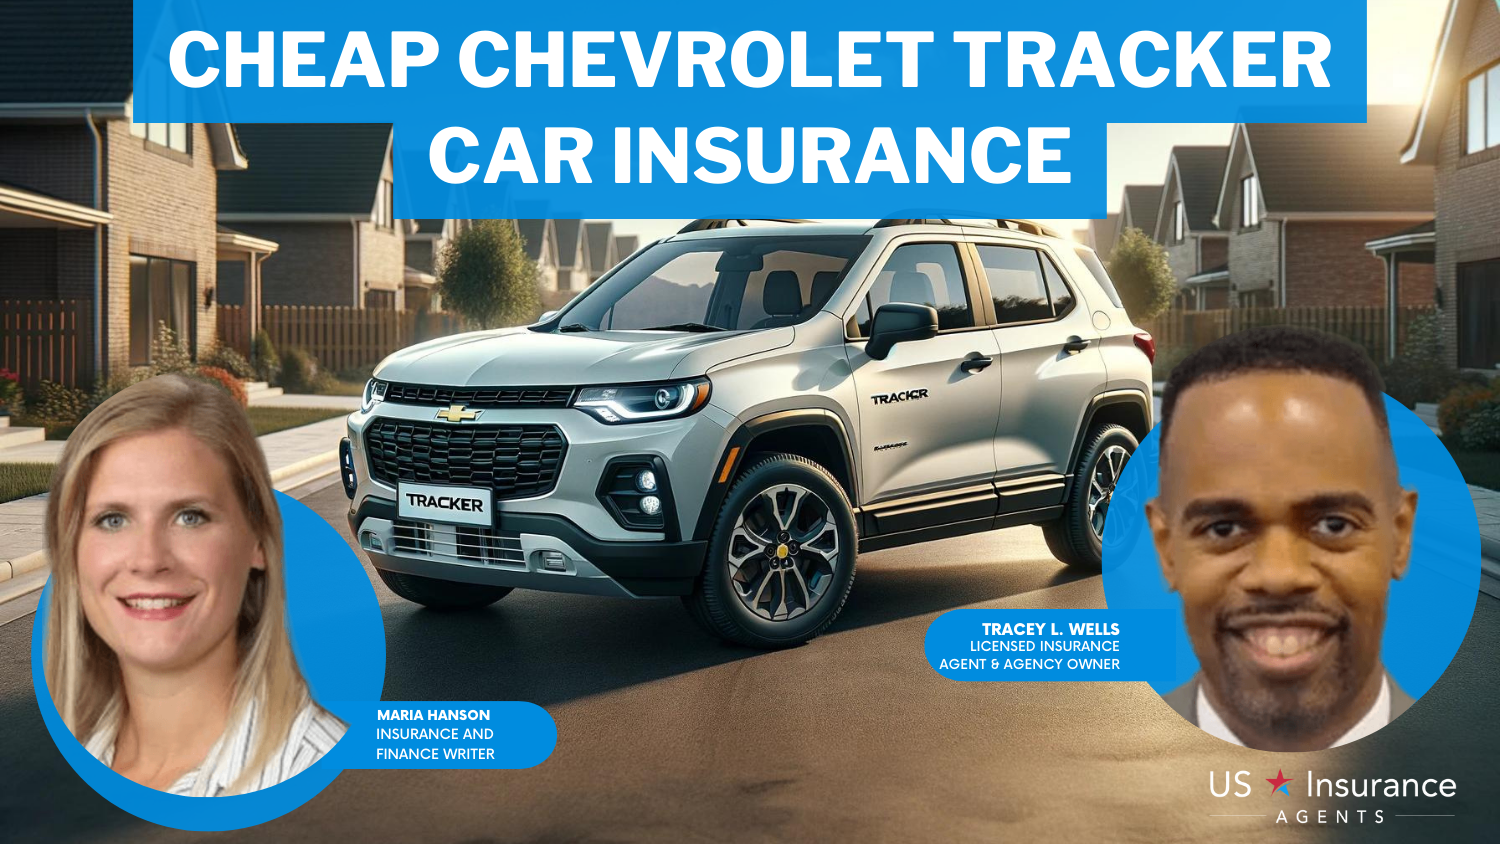 USAA, Erie, and State Farm: Cheap Chevrolet Tracker Car Insurance